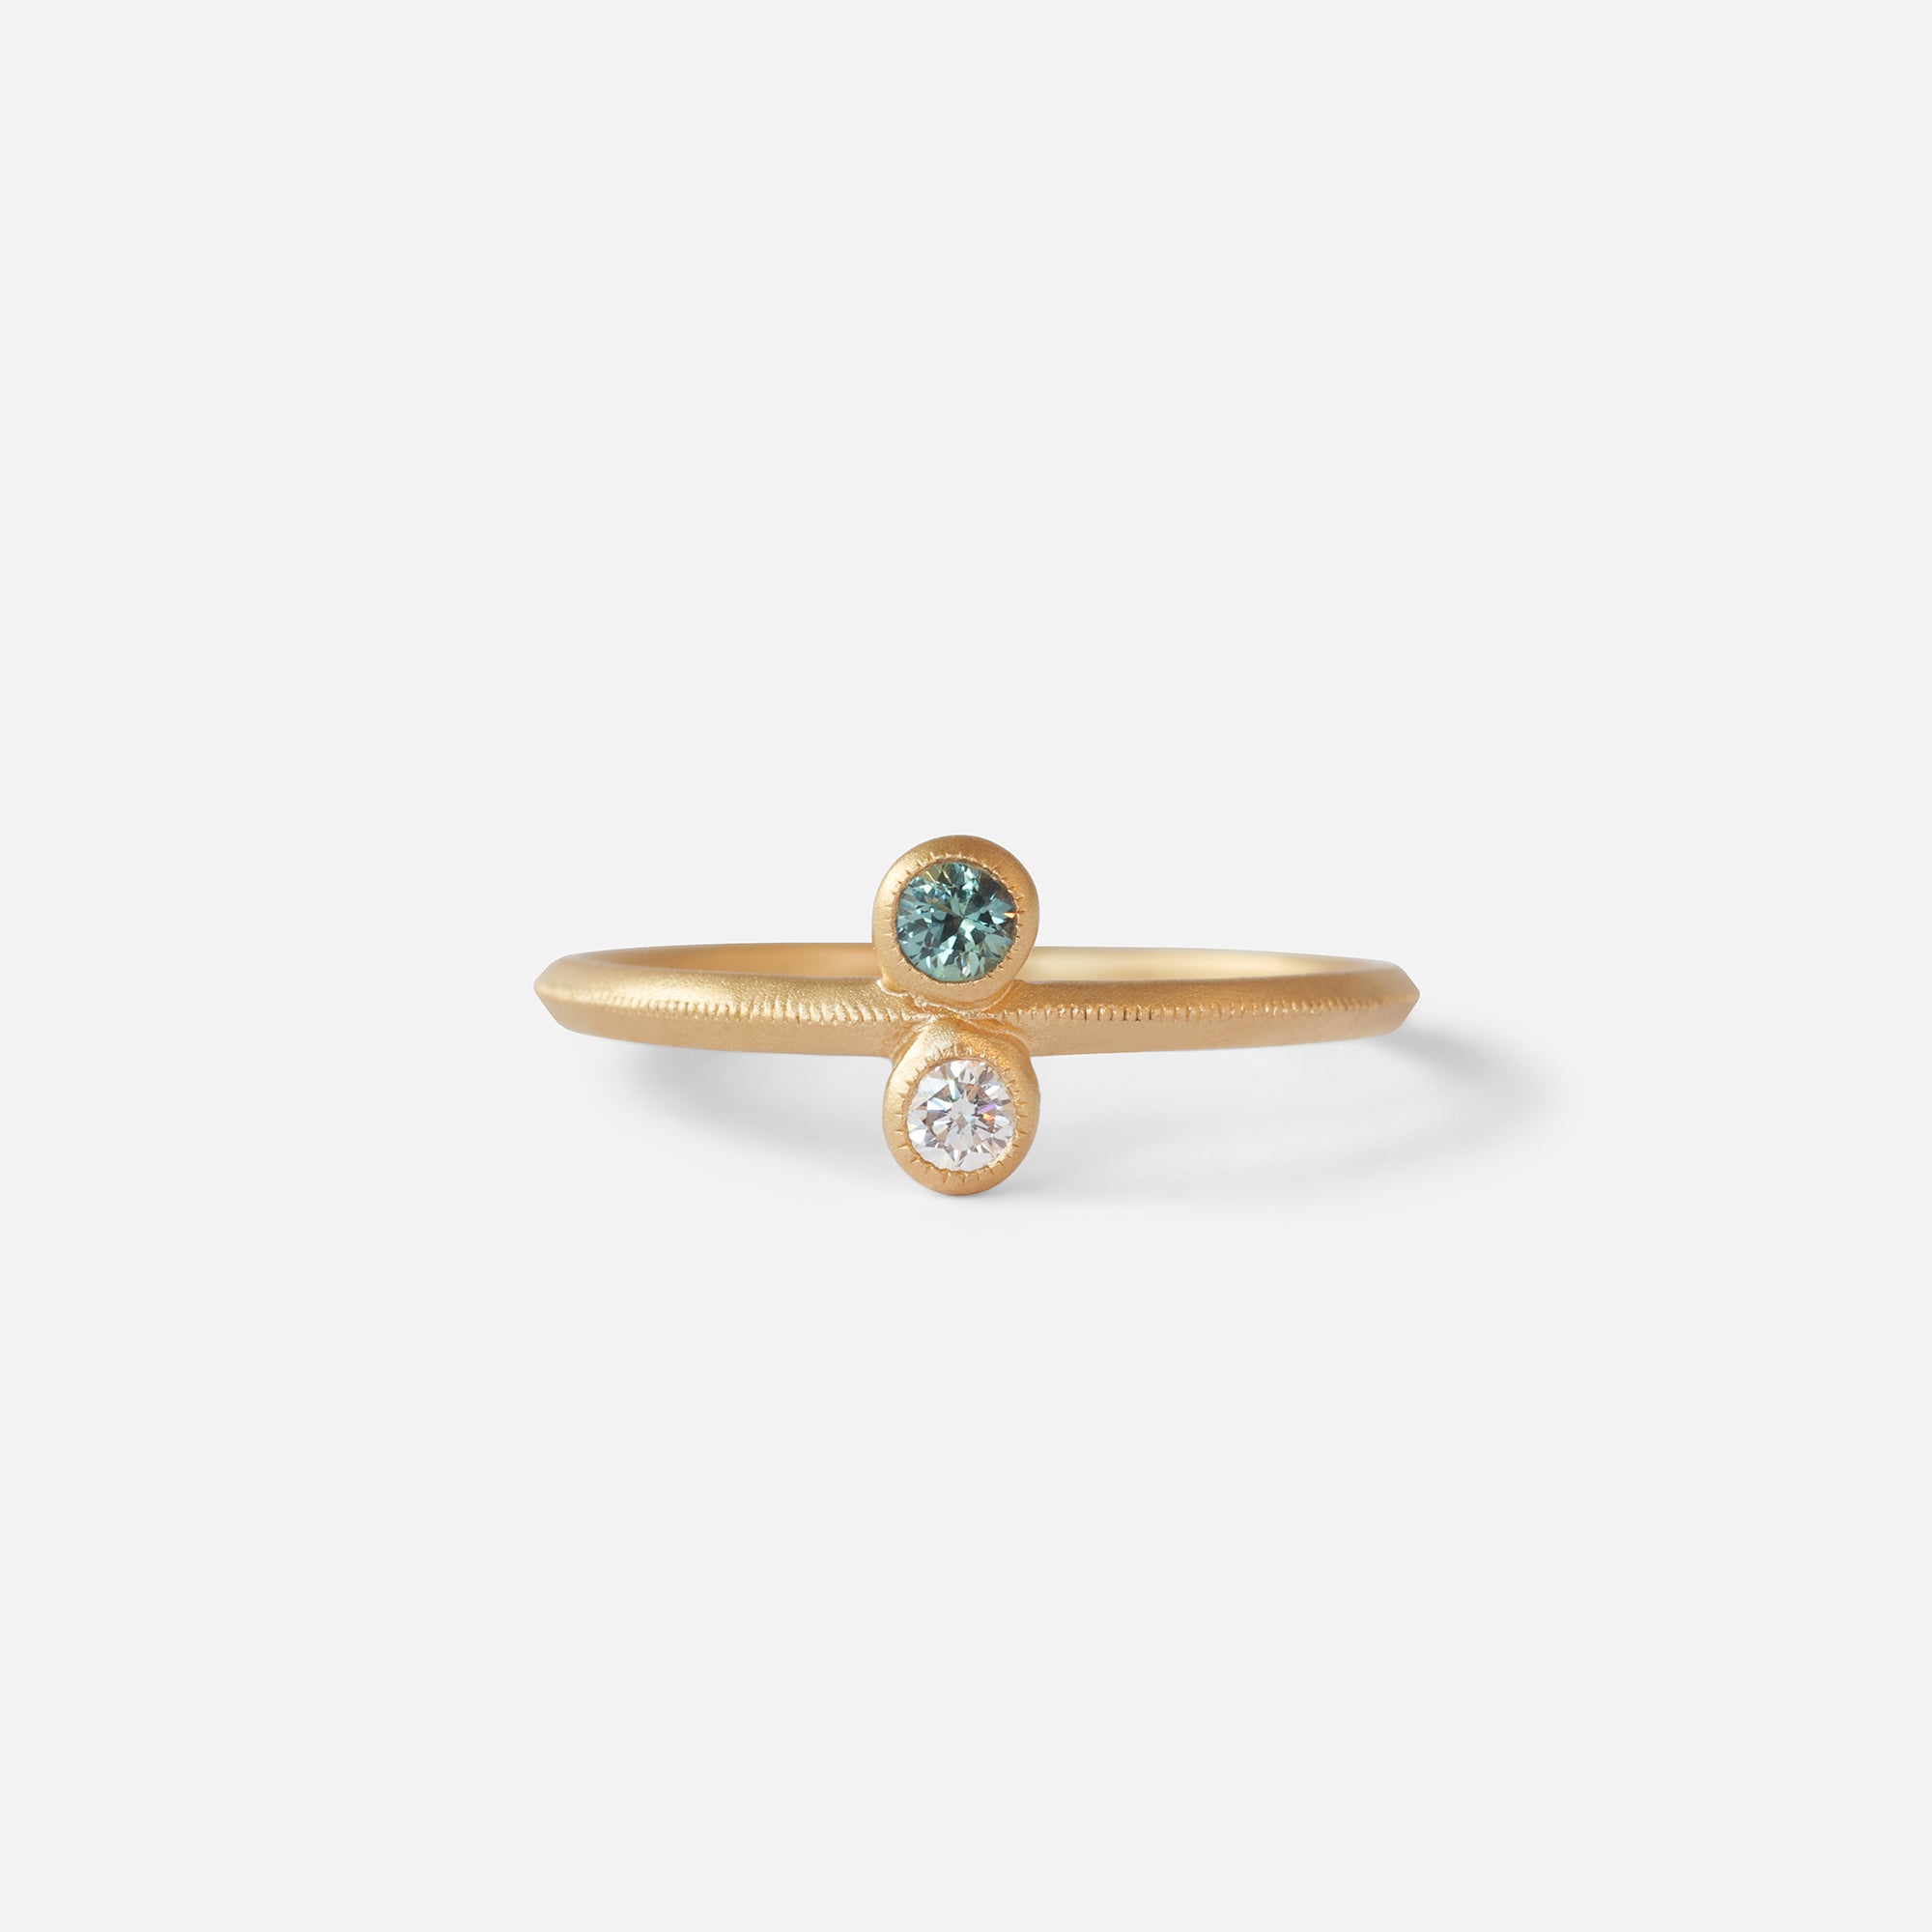 Toi et Moi / Blue Green Sapphire + Melee White Diamond Ring By fitzgerald jewelry